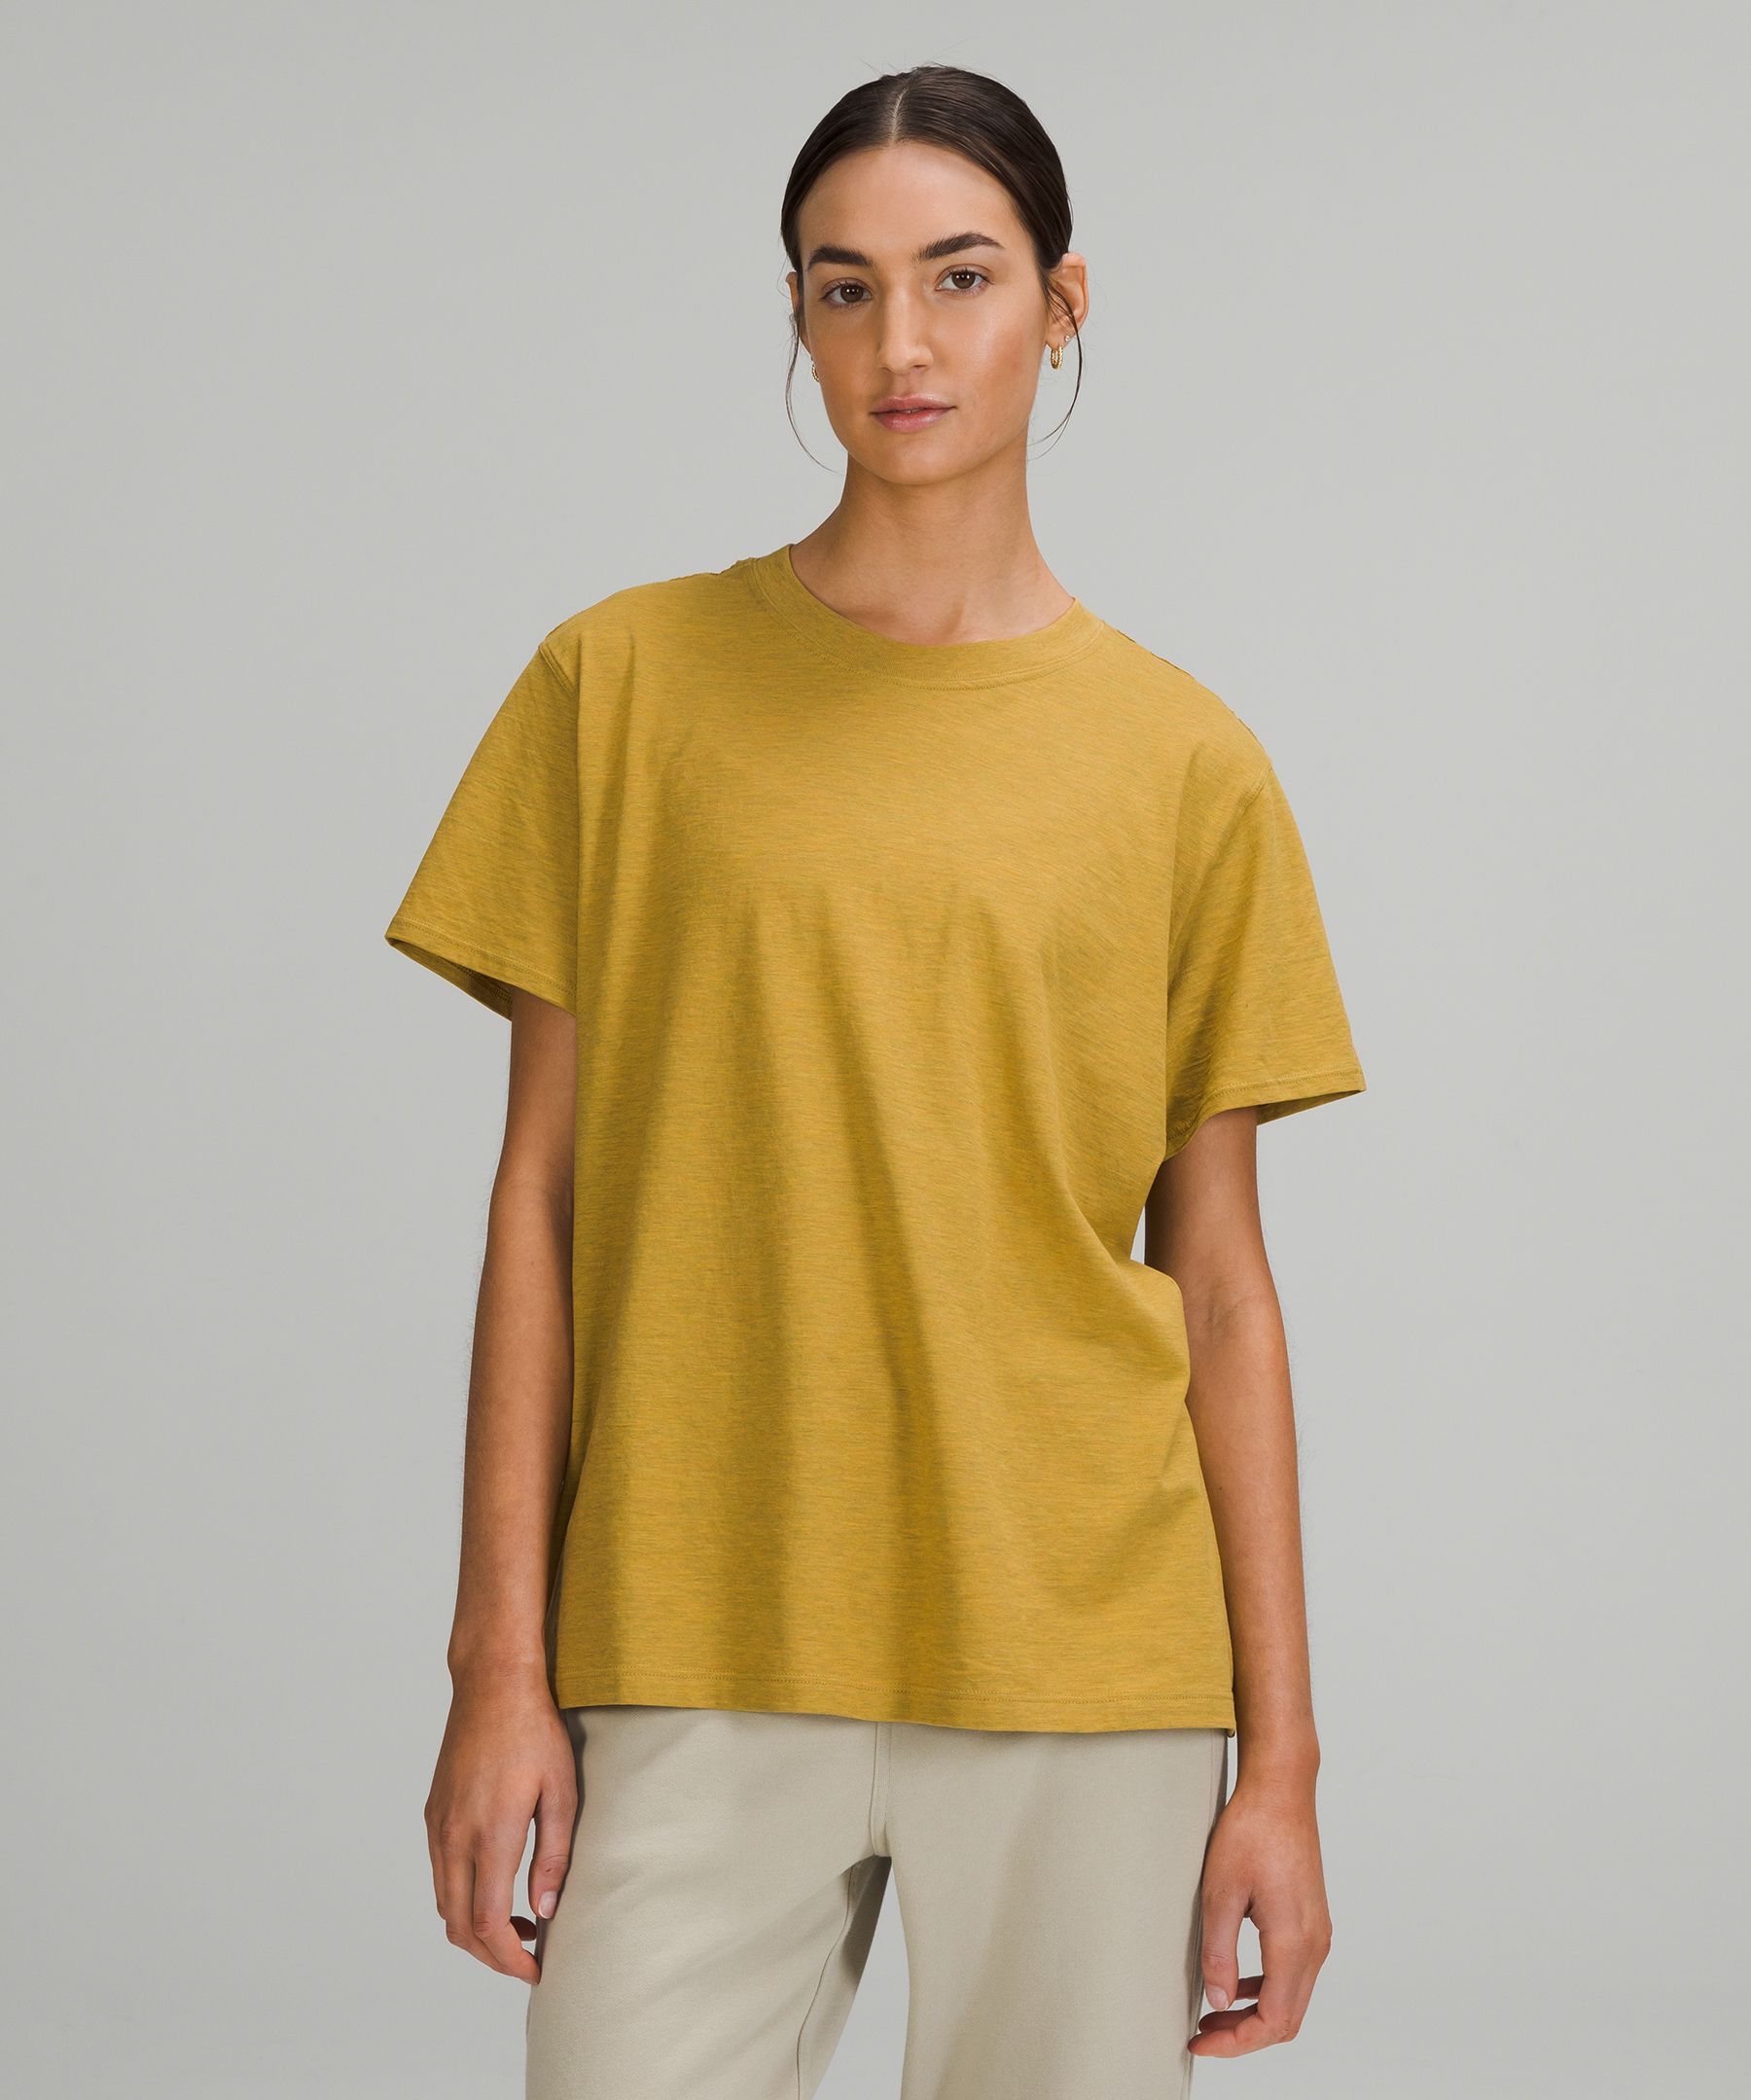 Lululemon All Yours Cotton T-shirt In Heathered Auric Gold